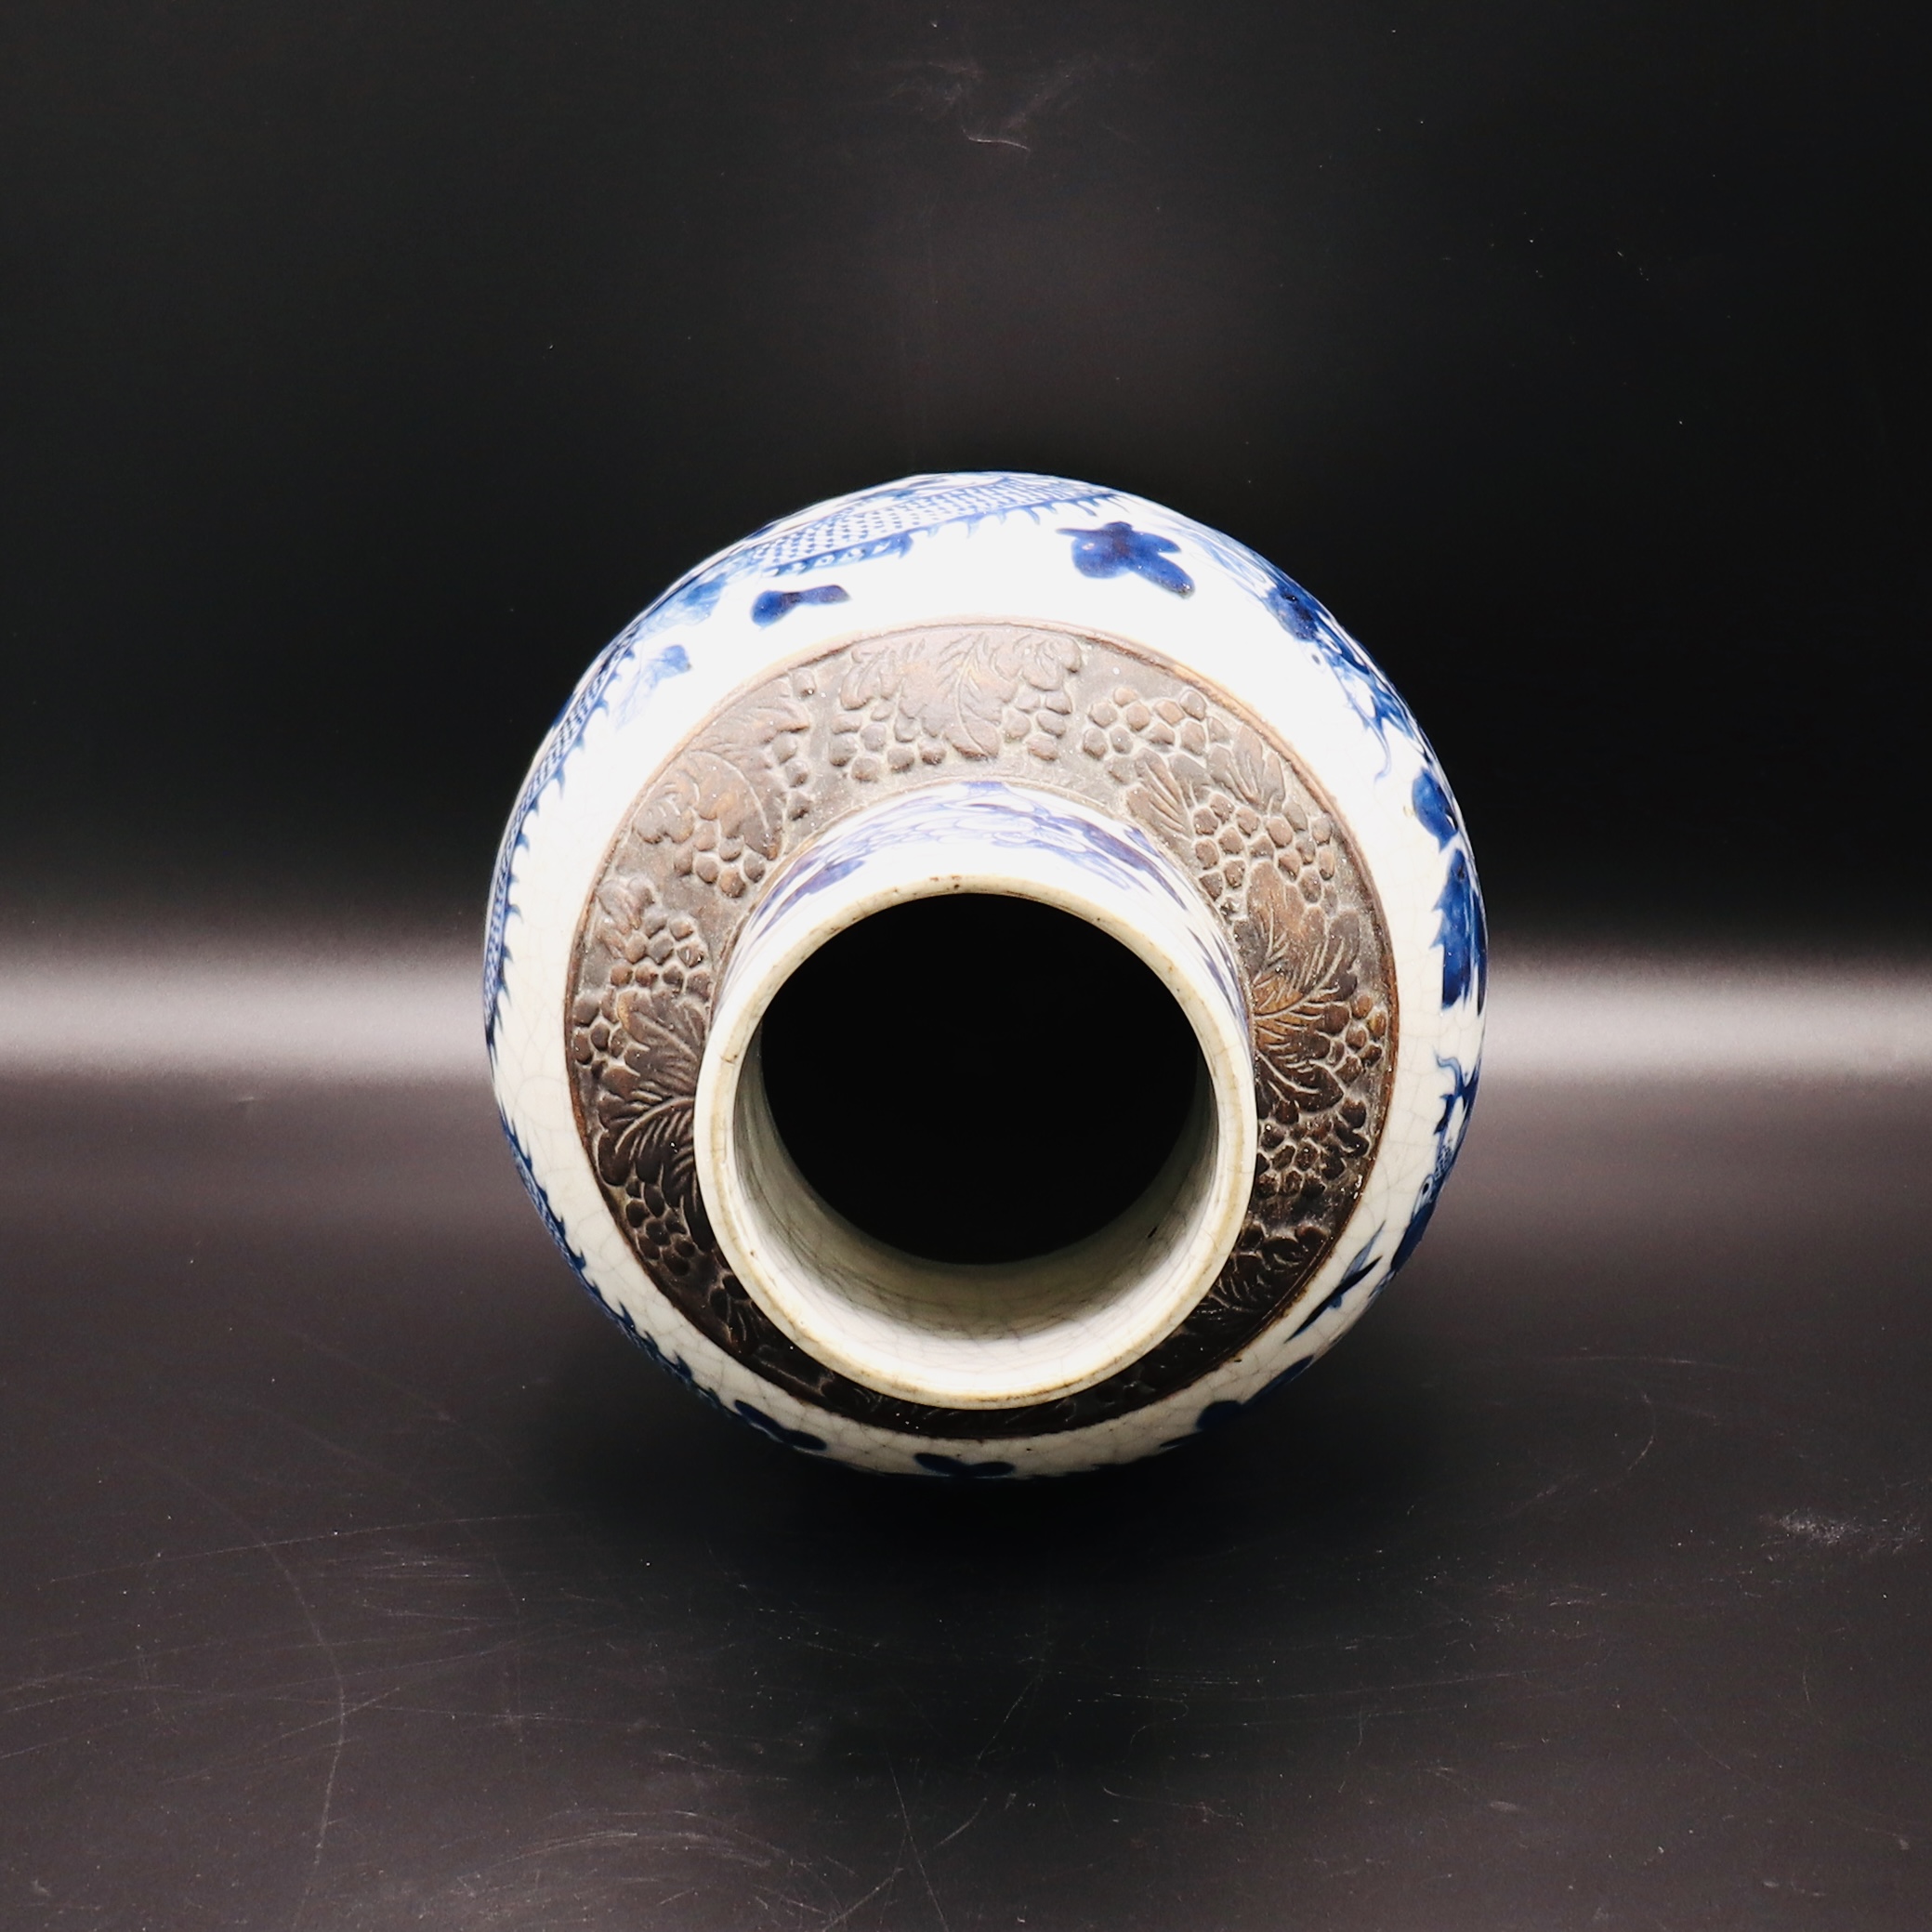 A CHINESE BLUE & WHITE CRACKLE VASE DEPICTING DRAGONS, 19TH CENTURY - Image 7 of 8